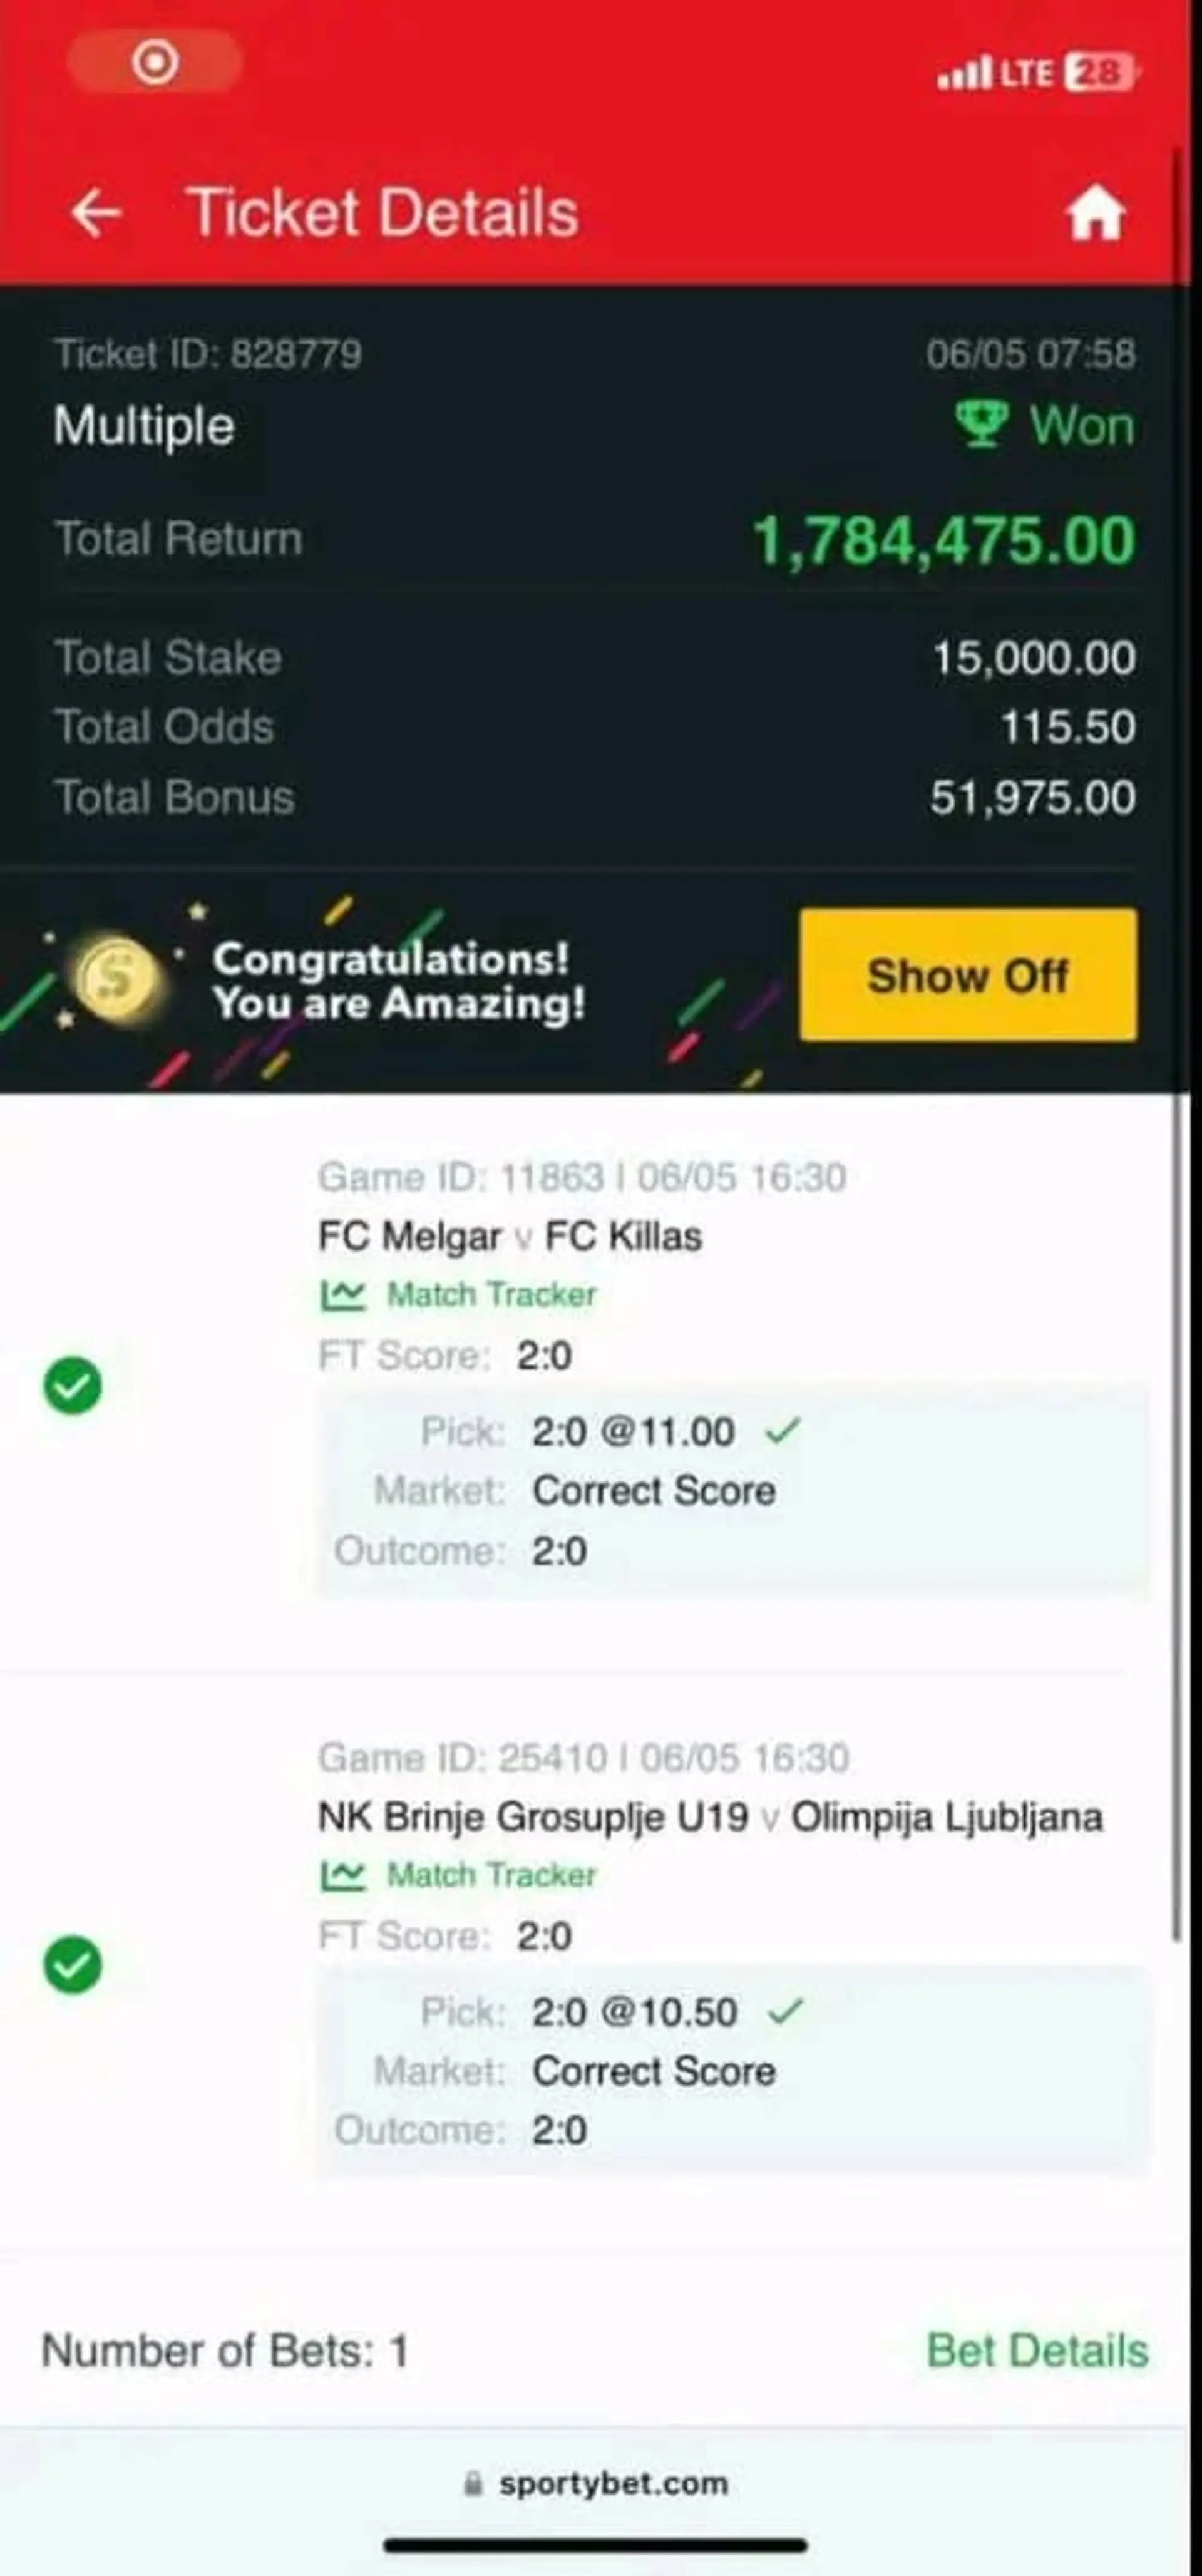 WhatsApp+2348133676846. Congratulations to our yesterday subscribers here is another great day or op